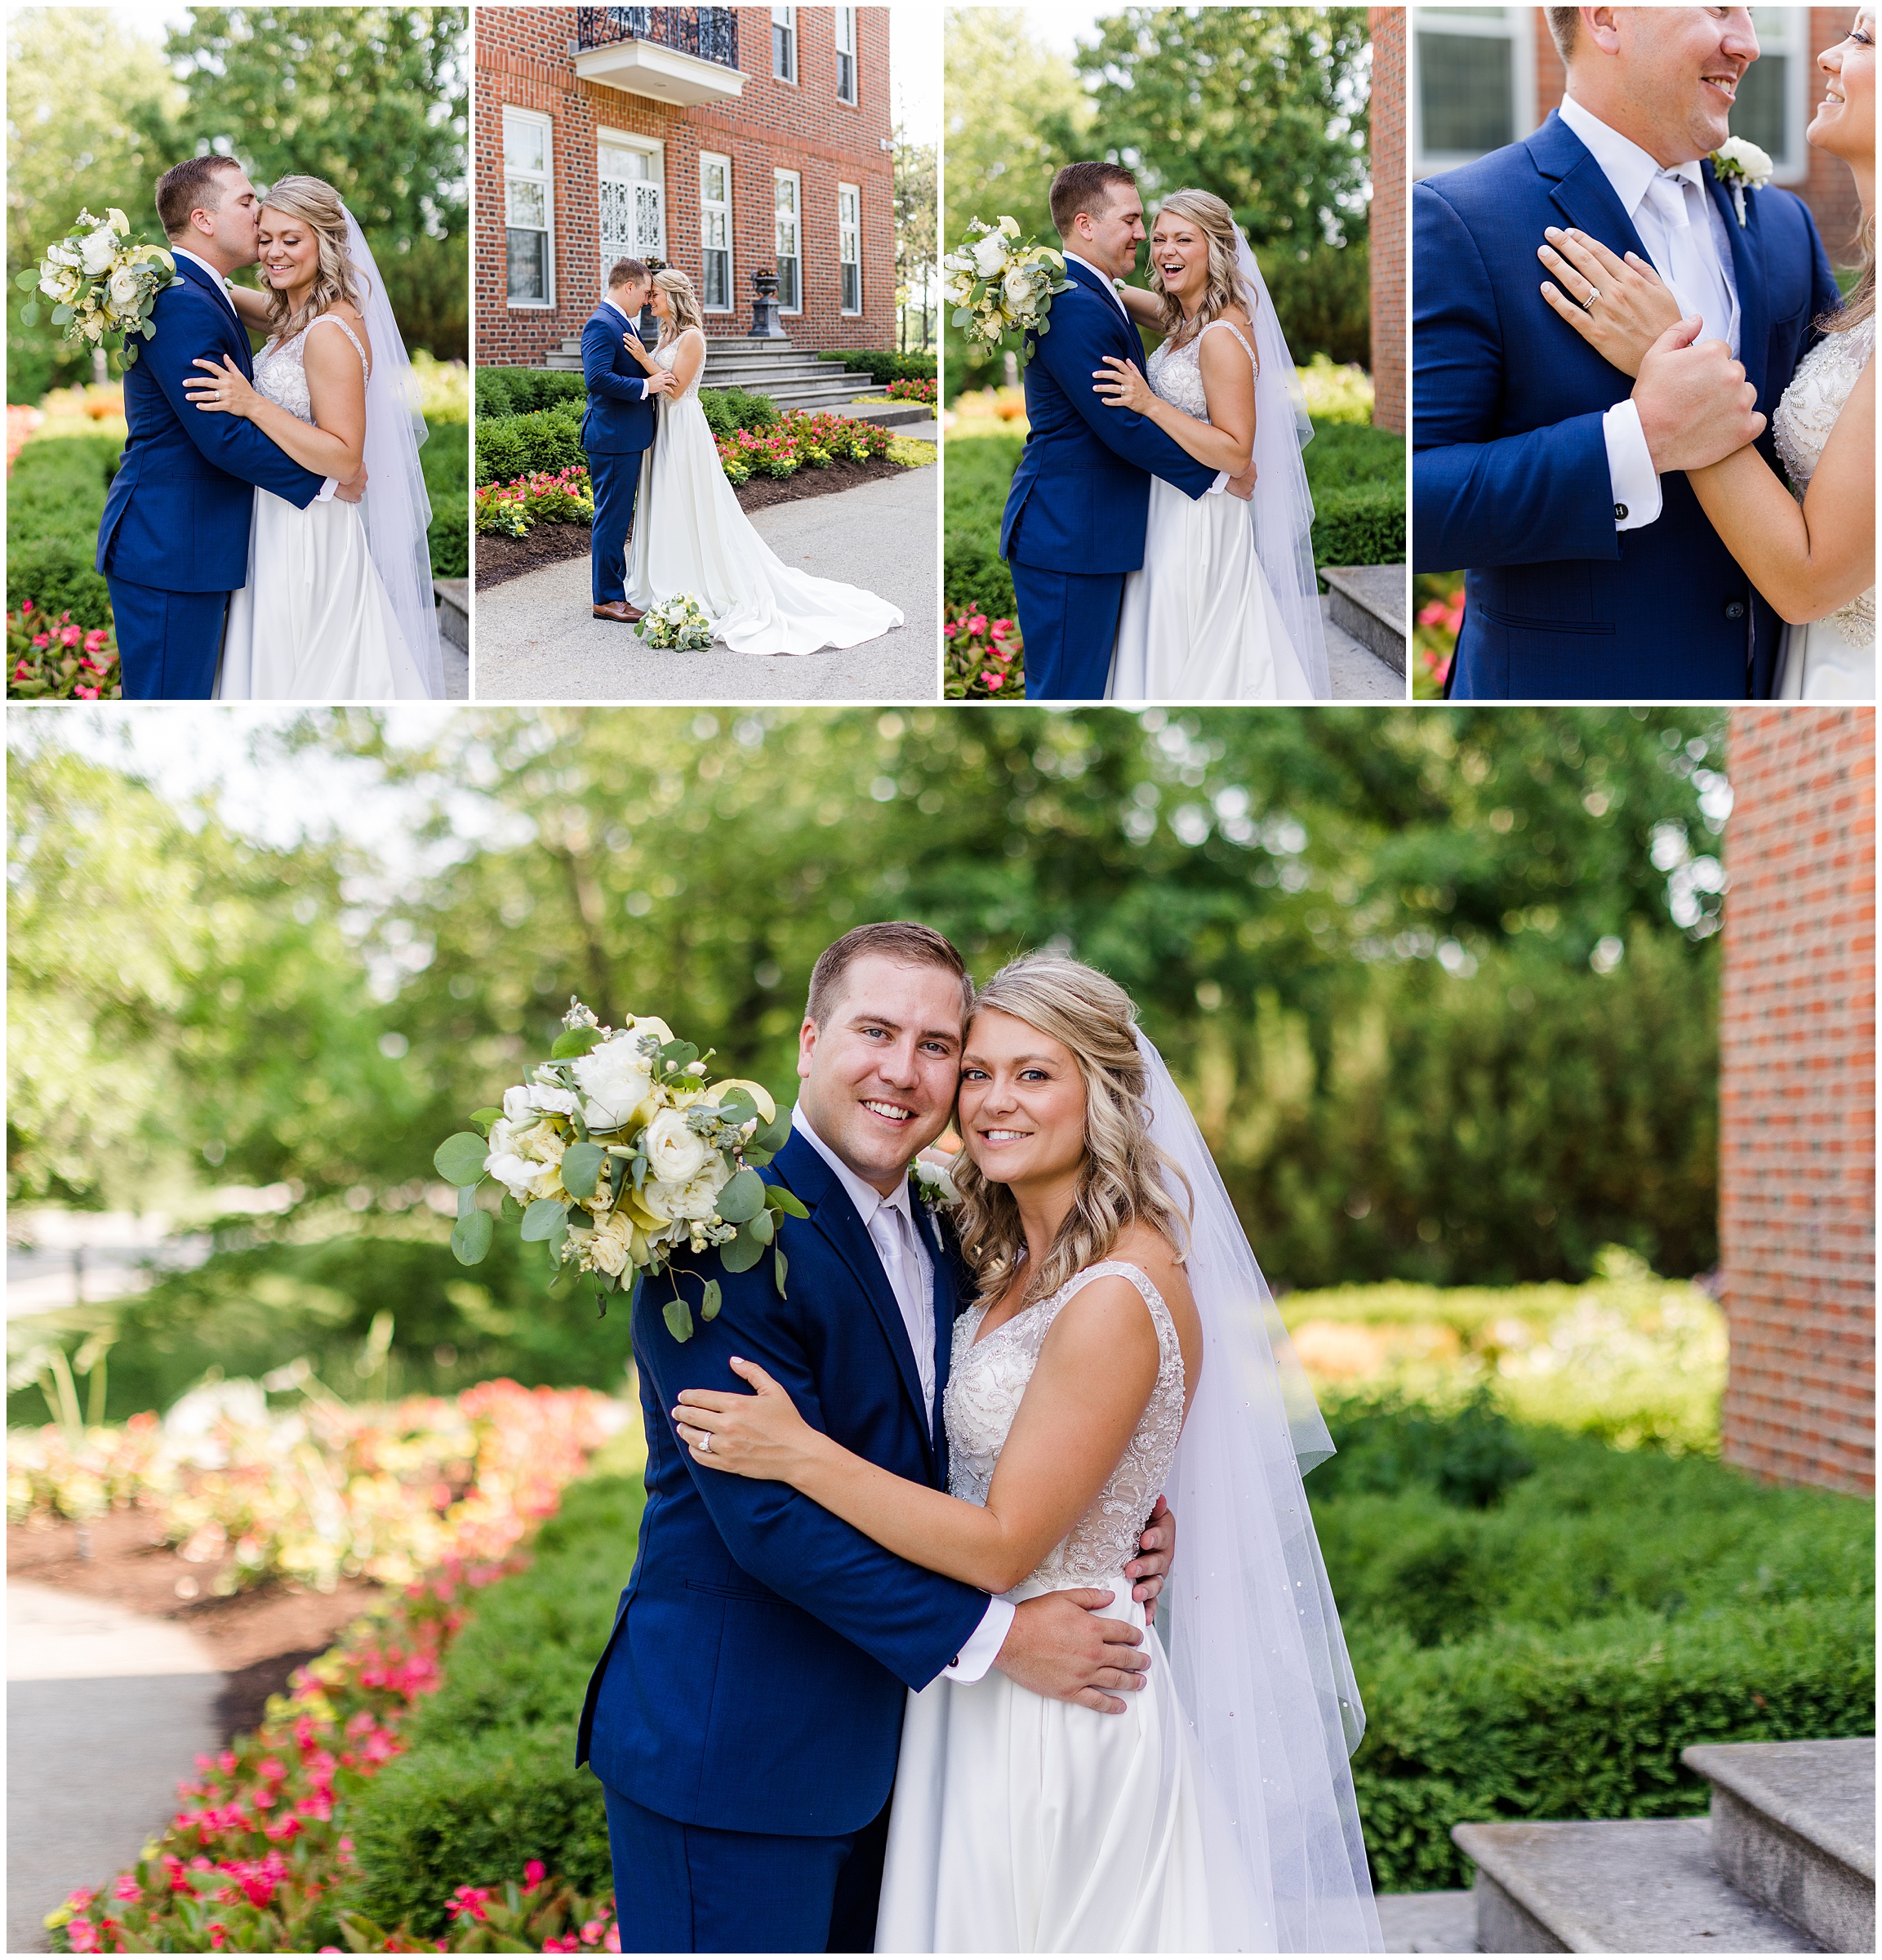 Bride and groom taking summer wedding photos at Coxhall Gardens in Carmel, Indiana with wedding photographer Jennifer Council. 